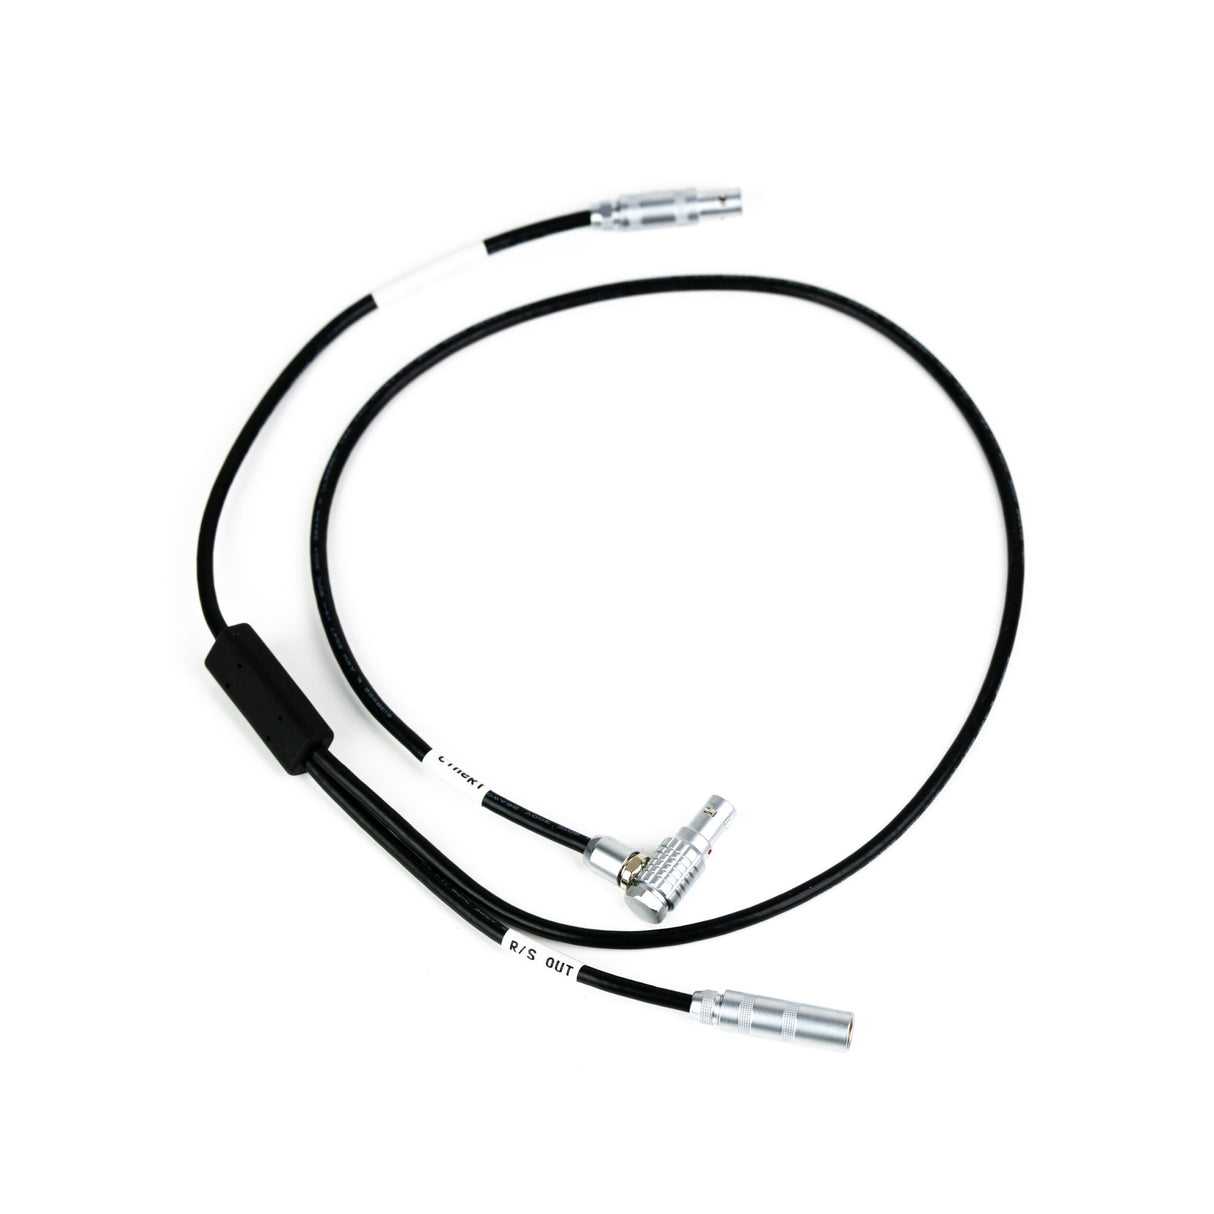 Heden VLC3 Cine RT Link Cable for YMER-3